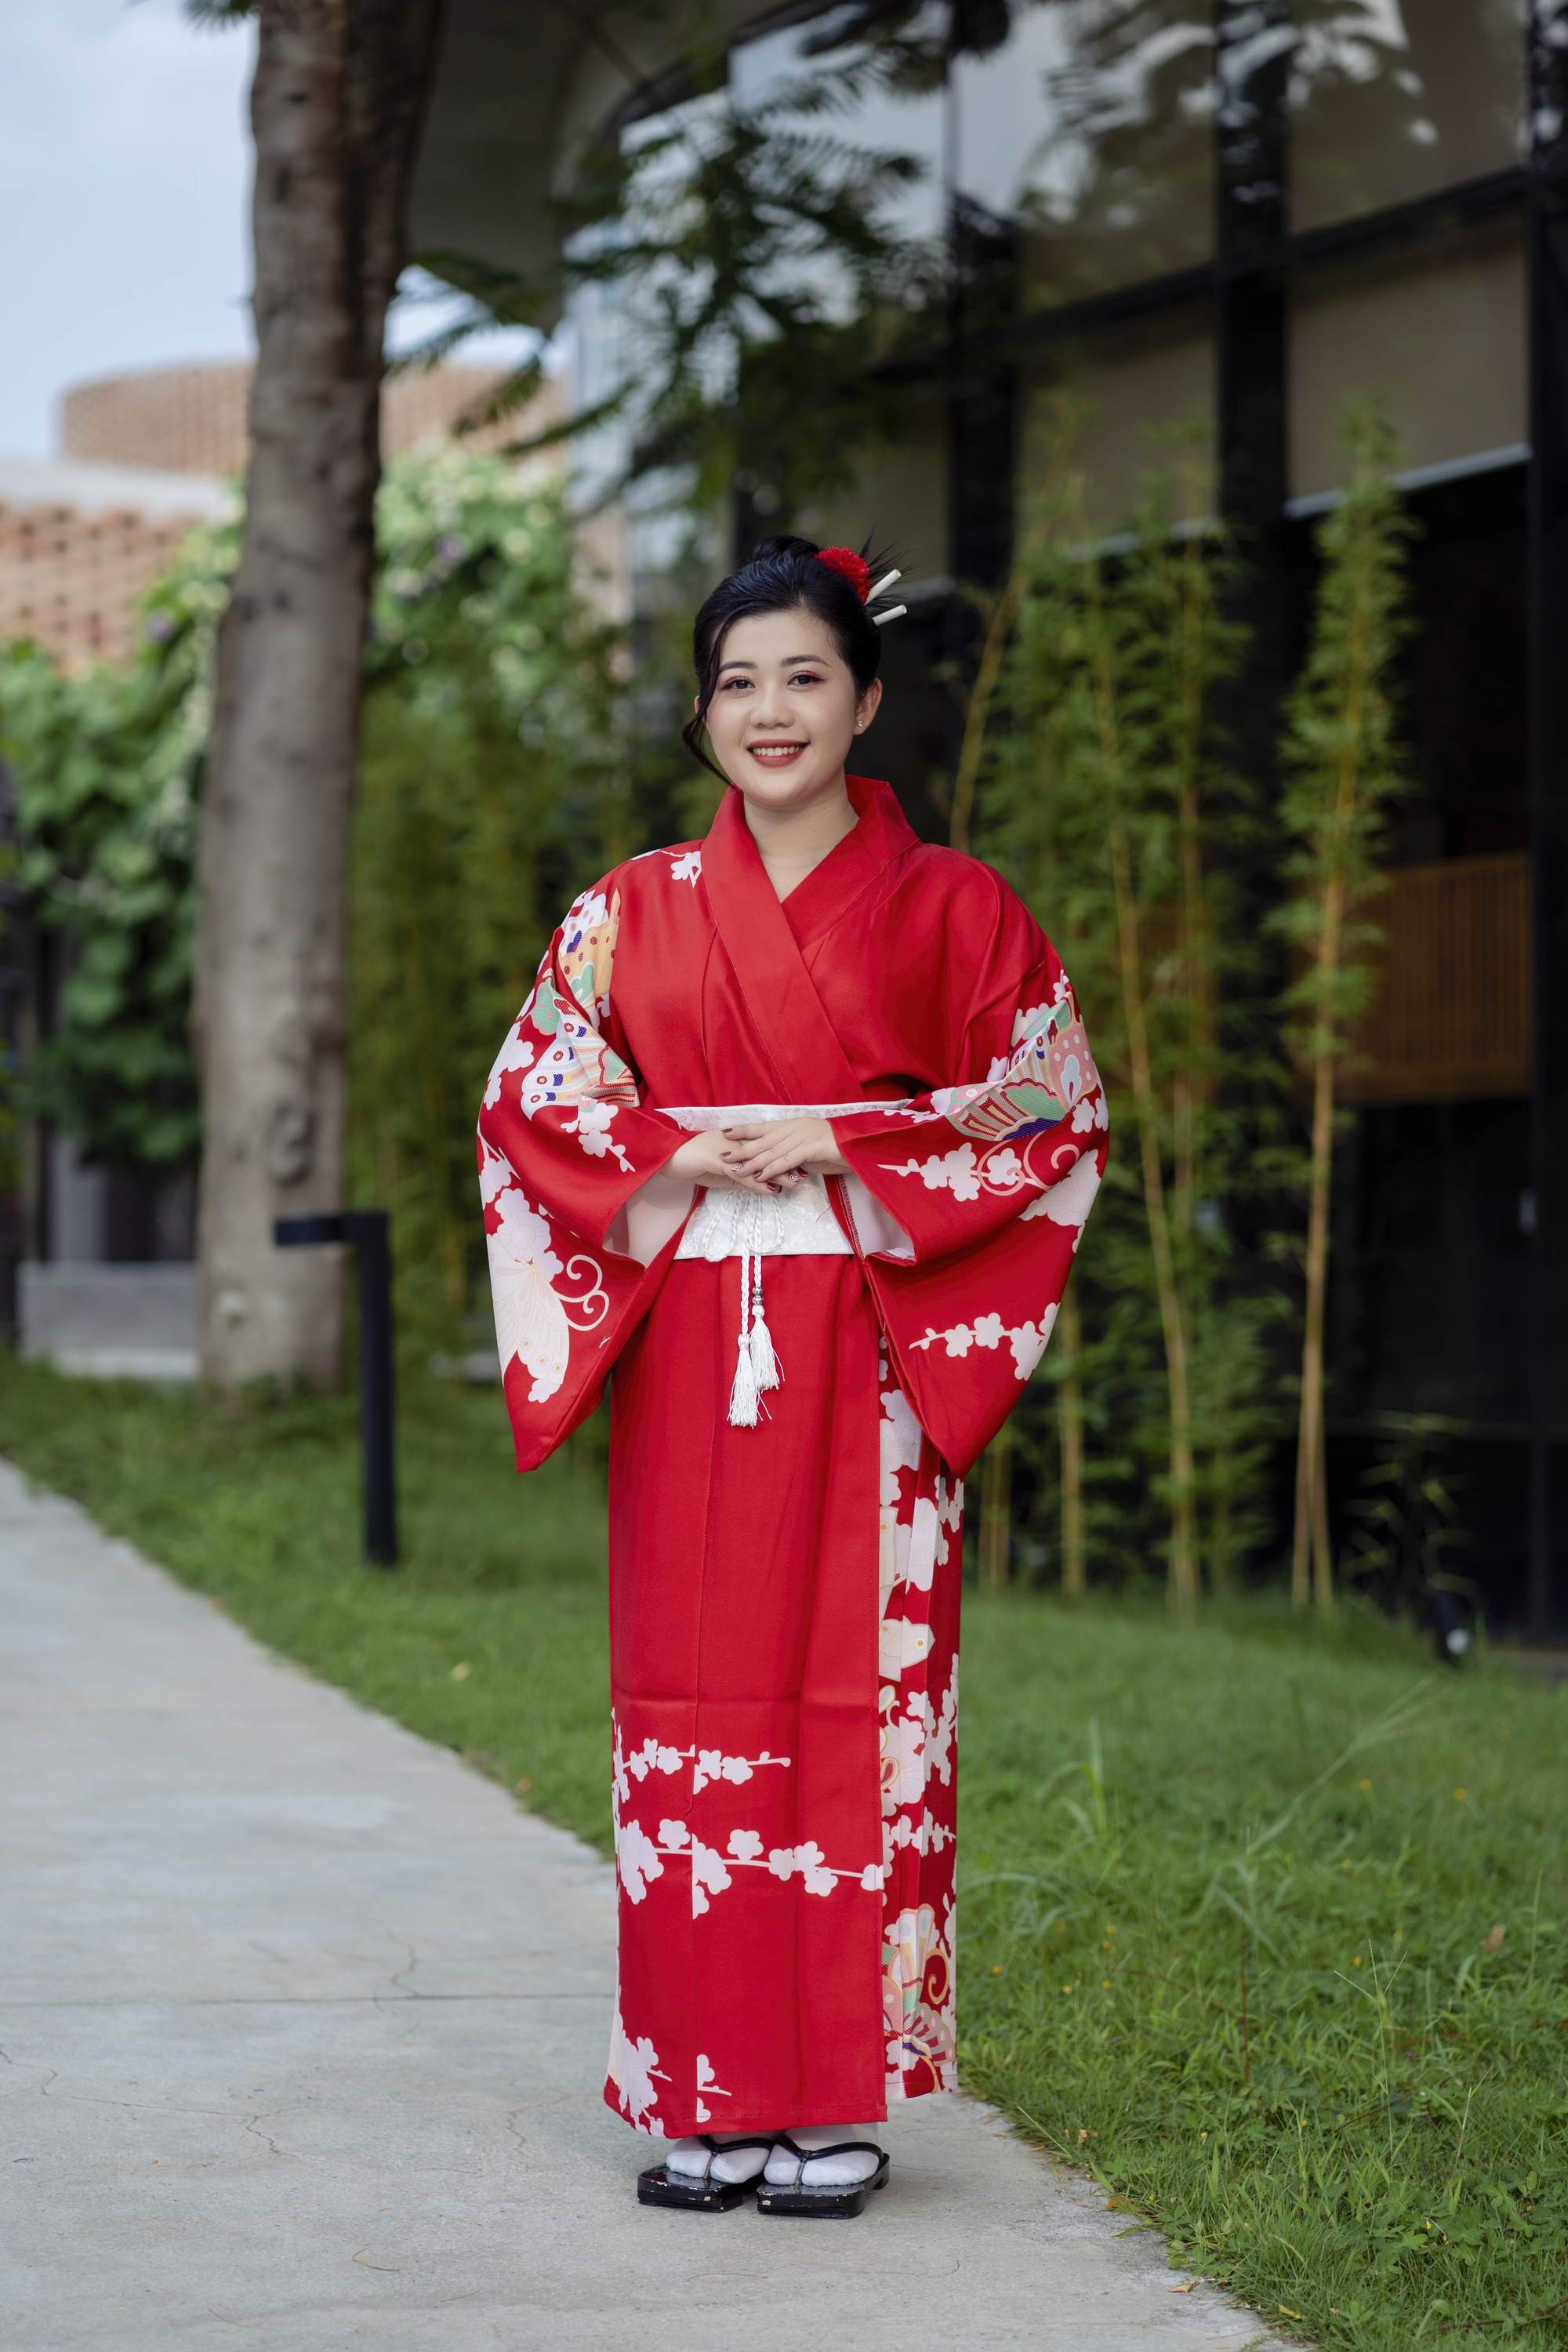 Geisha Culture in Kyoto, Japan: An Inside Look | Vogue